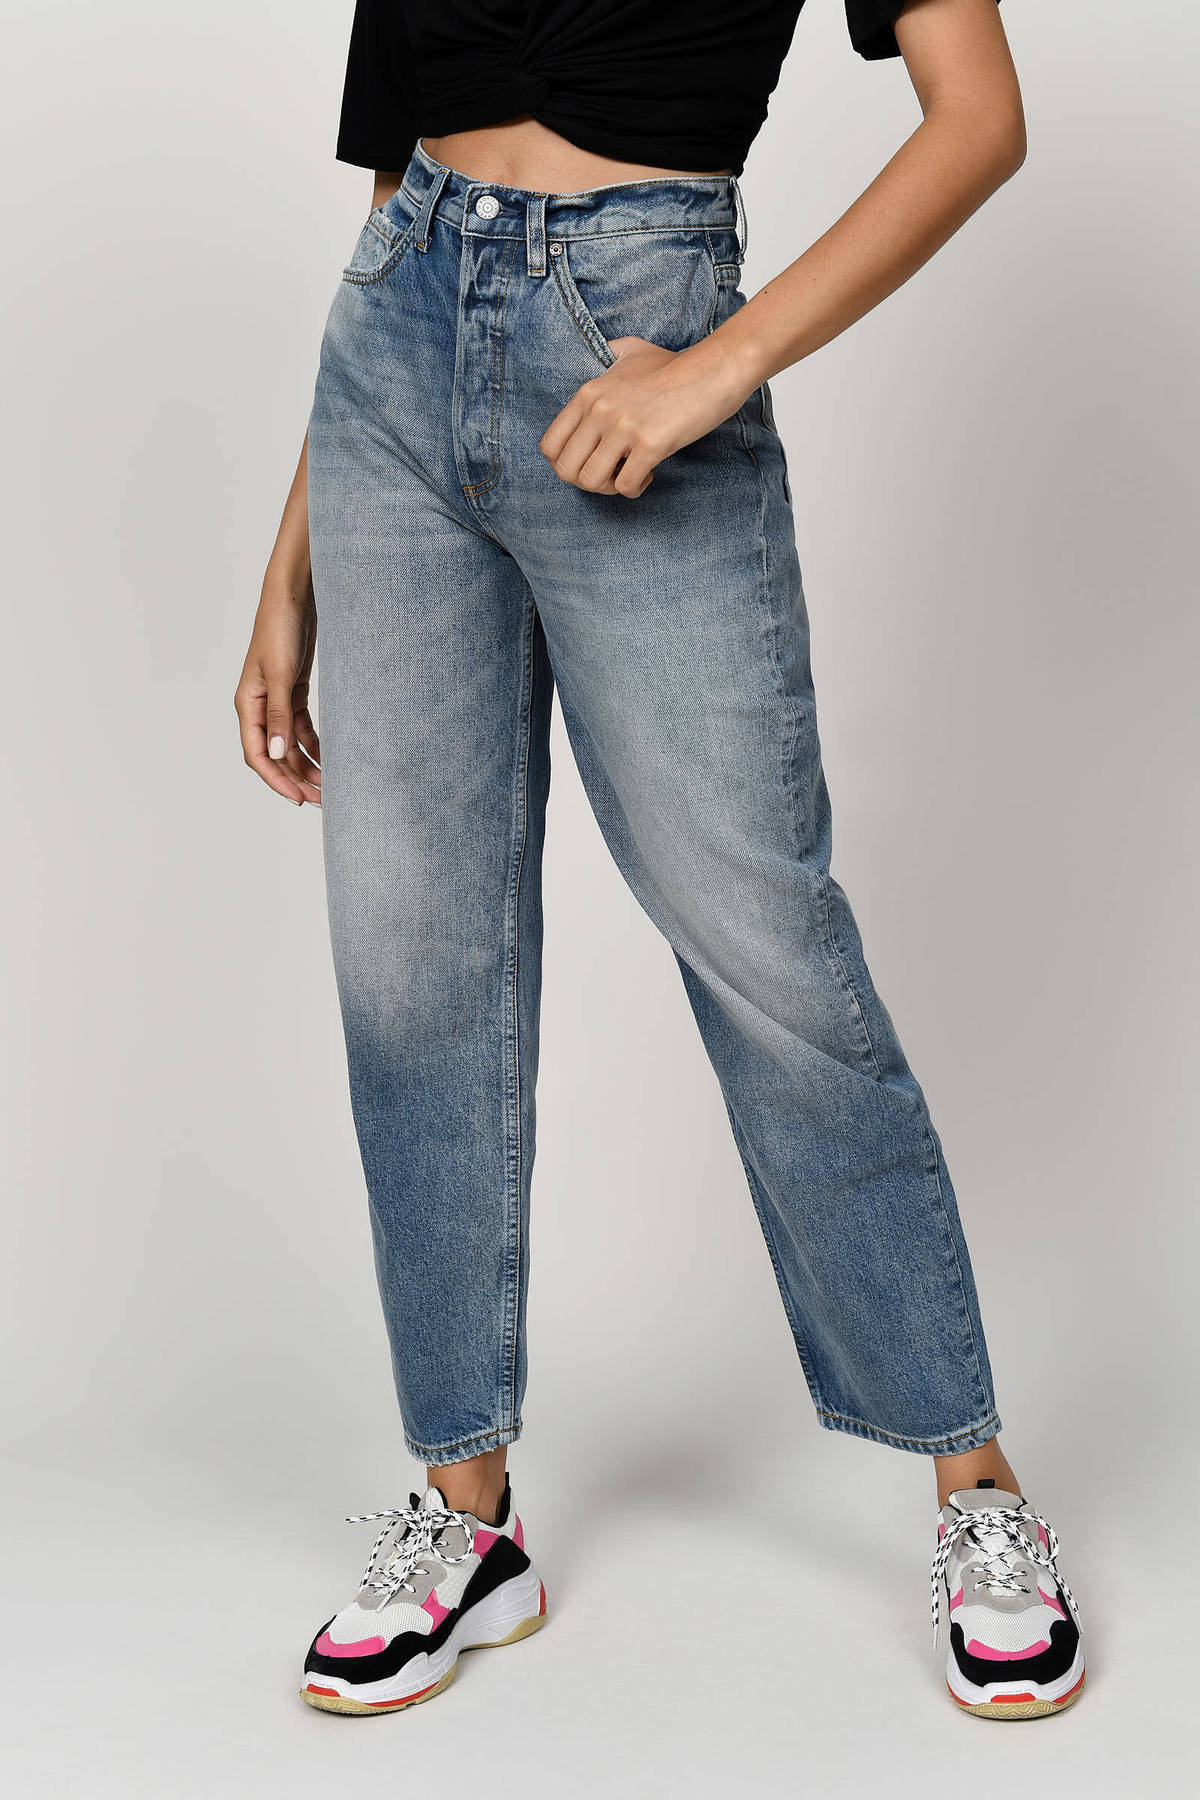 Toby Relaxed & Tapered Jeans in Medium Washed - $94 | Tobi US